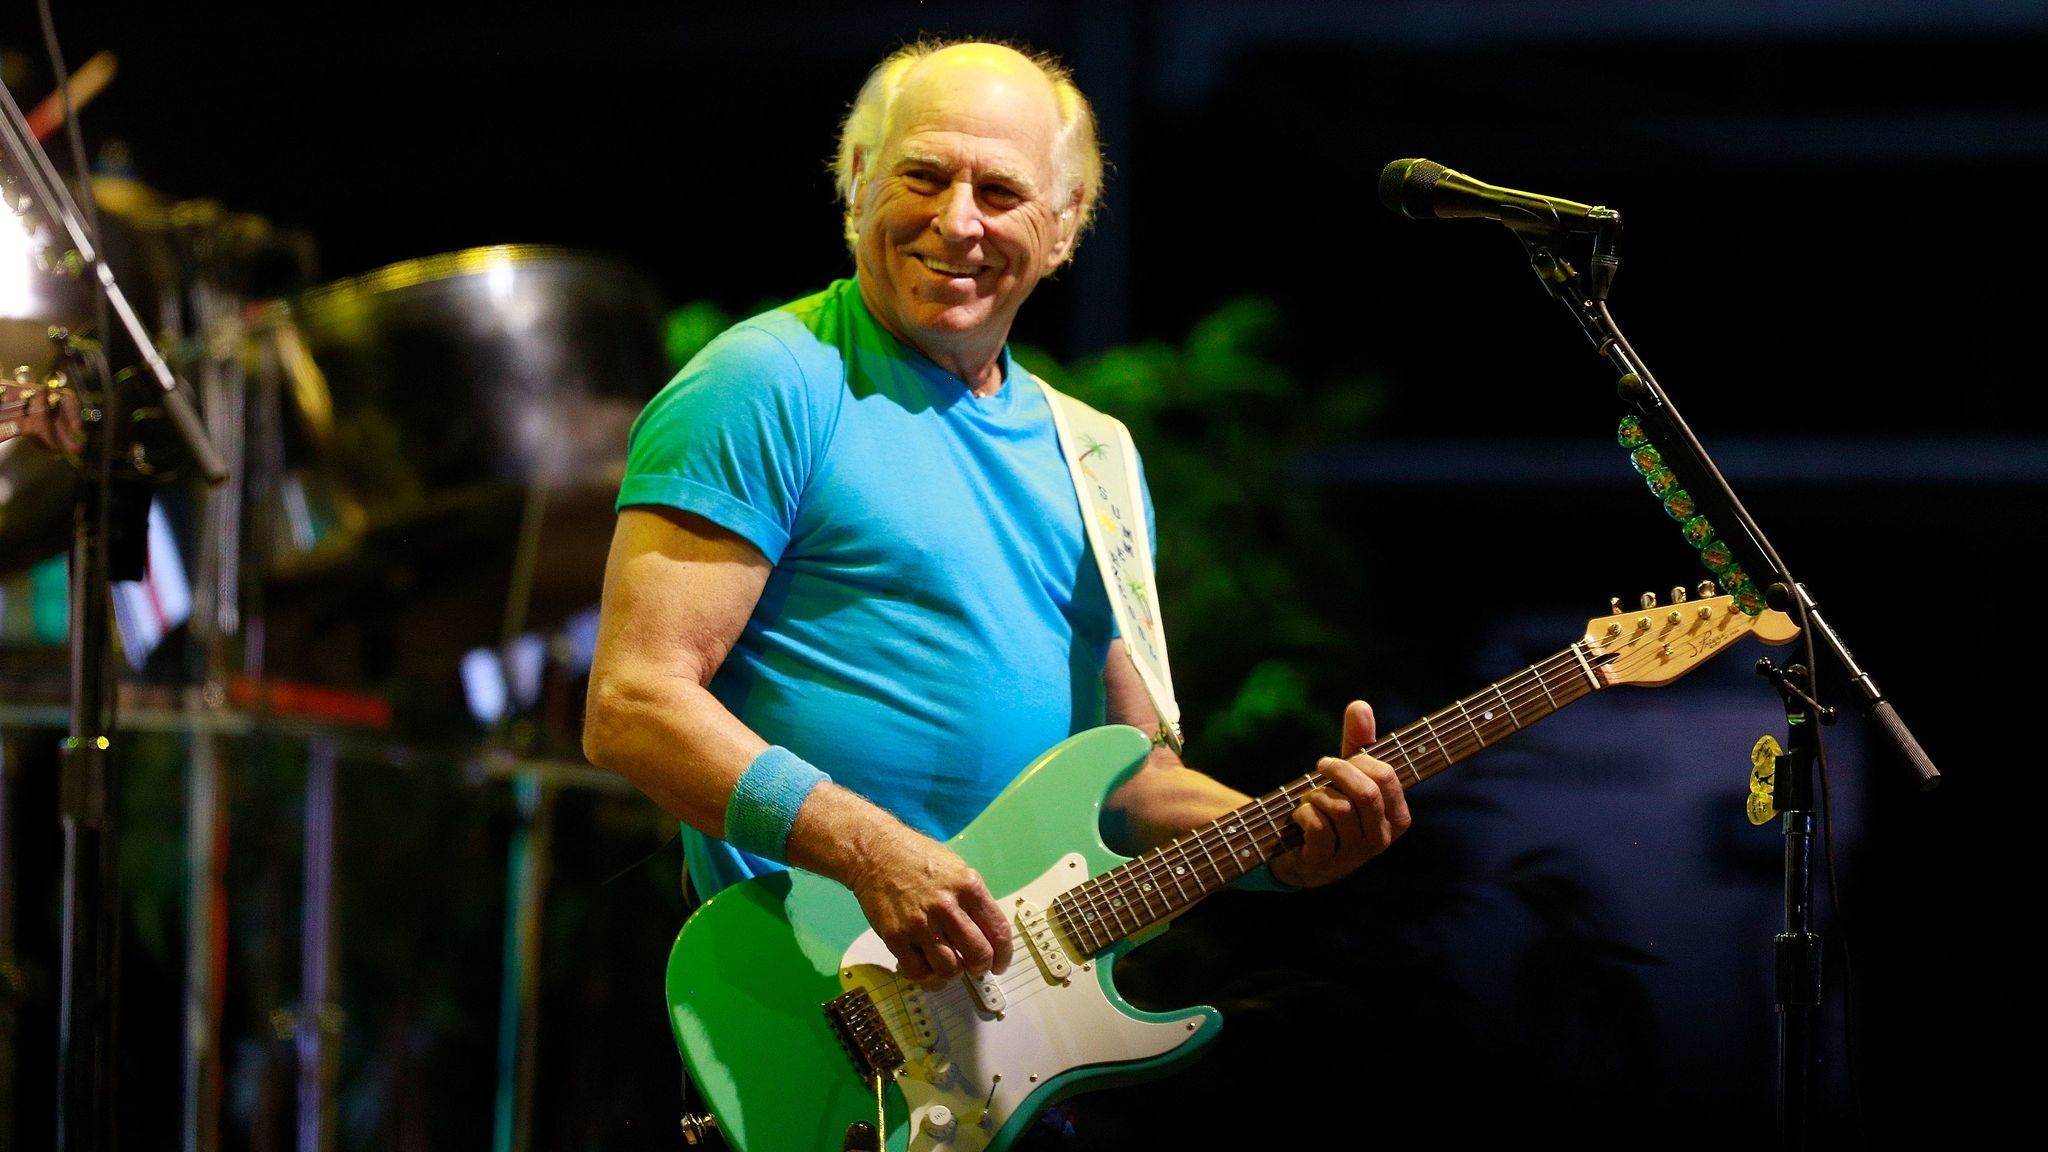 Jimmy Buffett's surprise March 28 Belly Up show sells out in less than a minute - The San Diego Union-Tribune